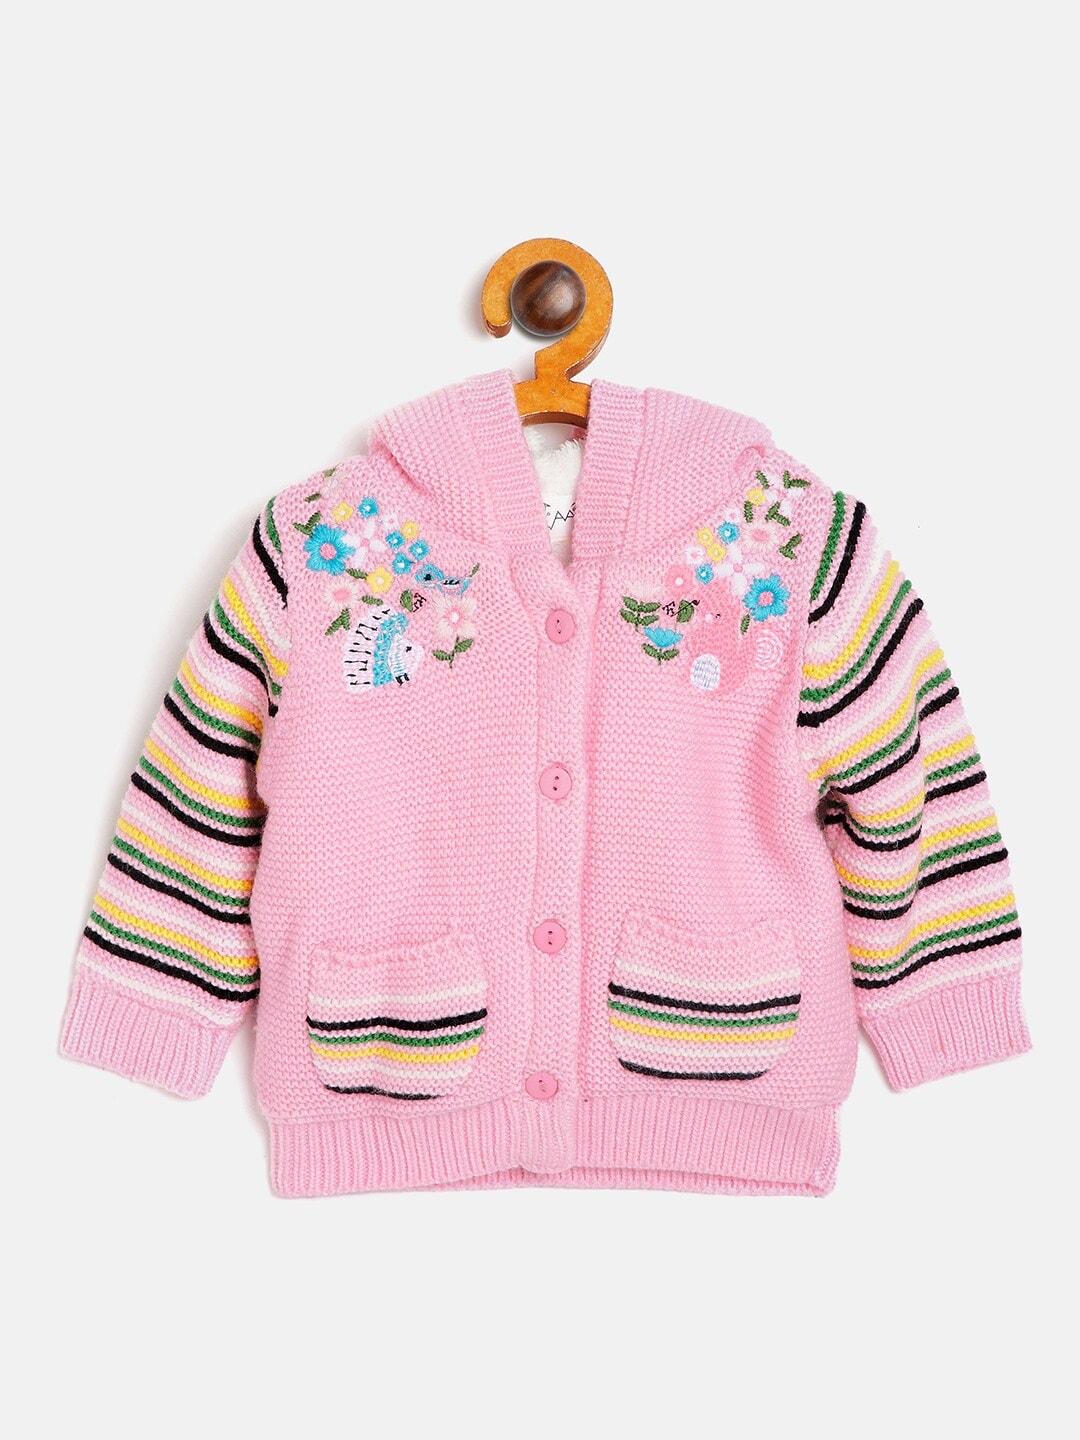 wildlinggs infants floral embroidered hooded pure cotton cardigan sweater